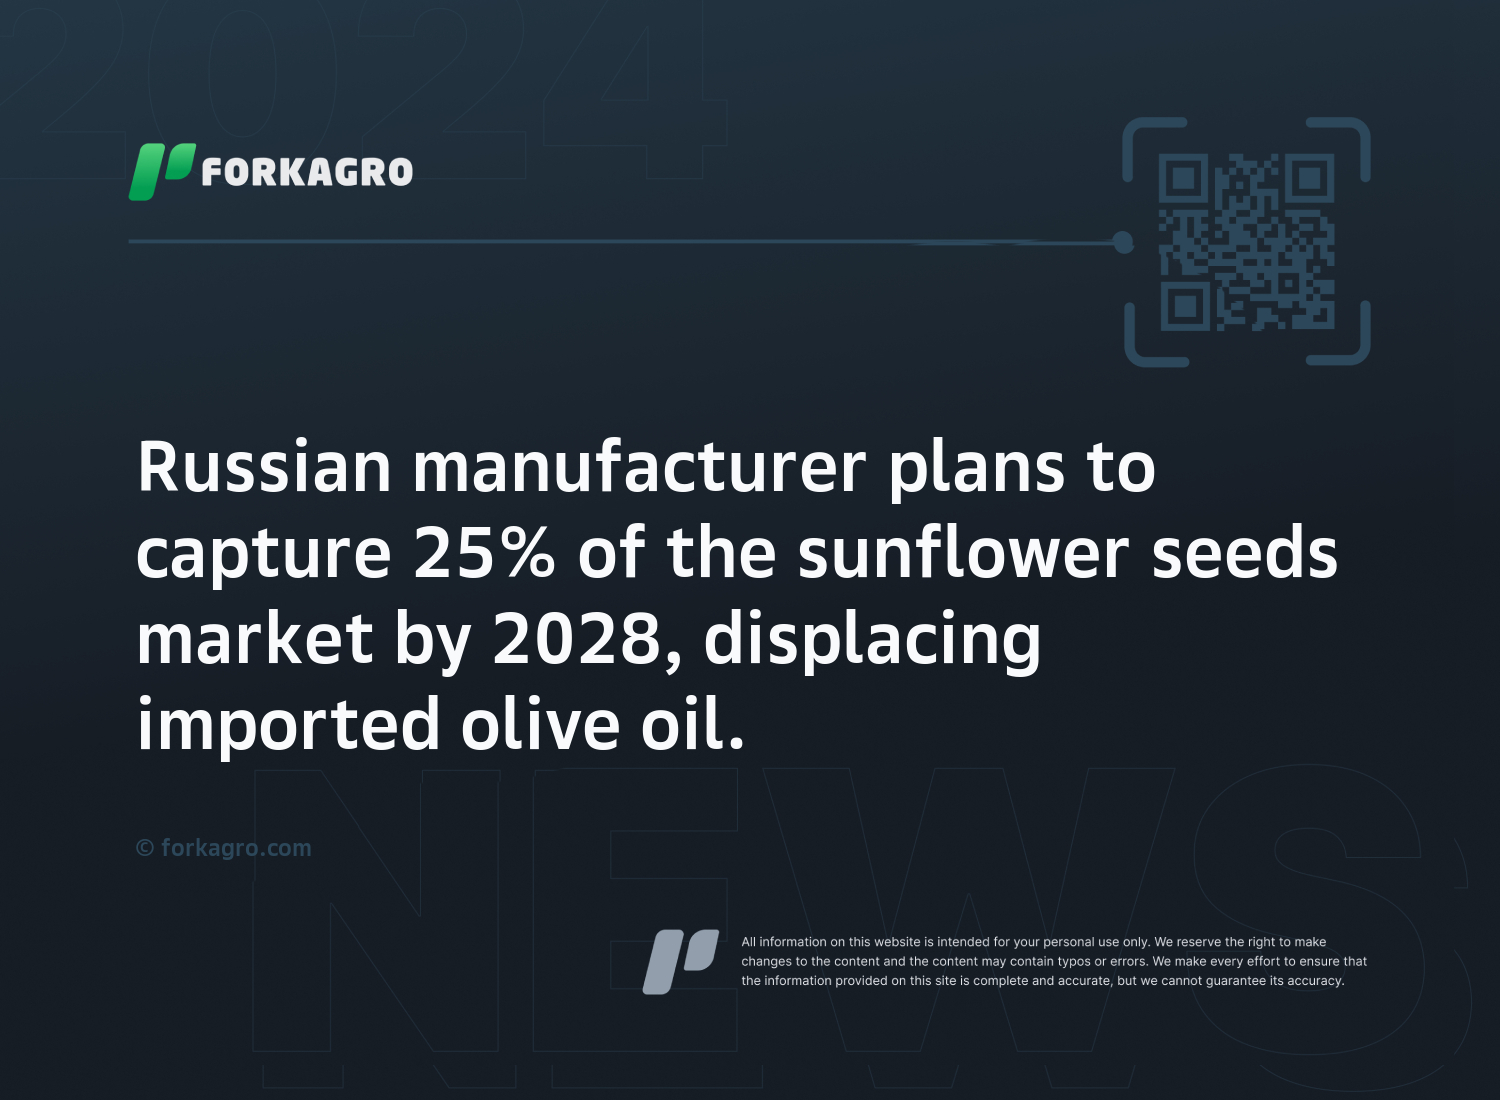 Russian manufacturer plans to capture 25% of the sunflower seeds market by 2028, displacing imported olive oil.